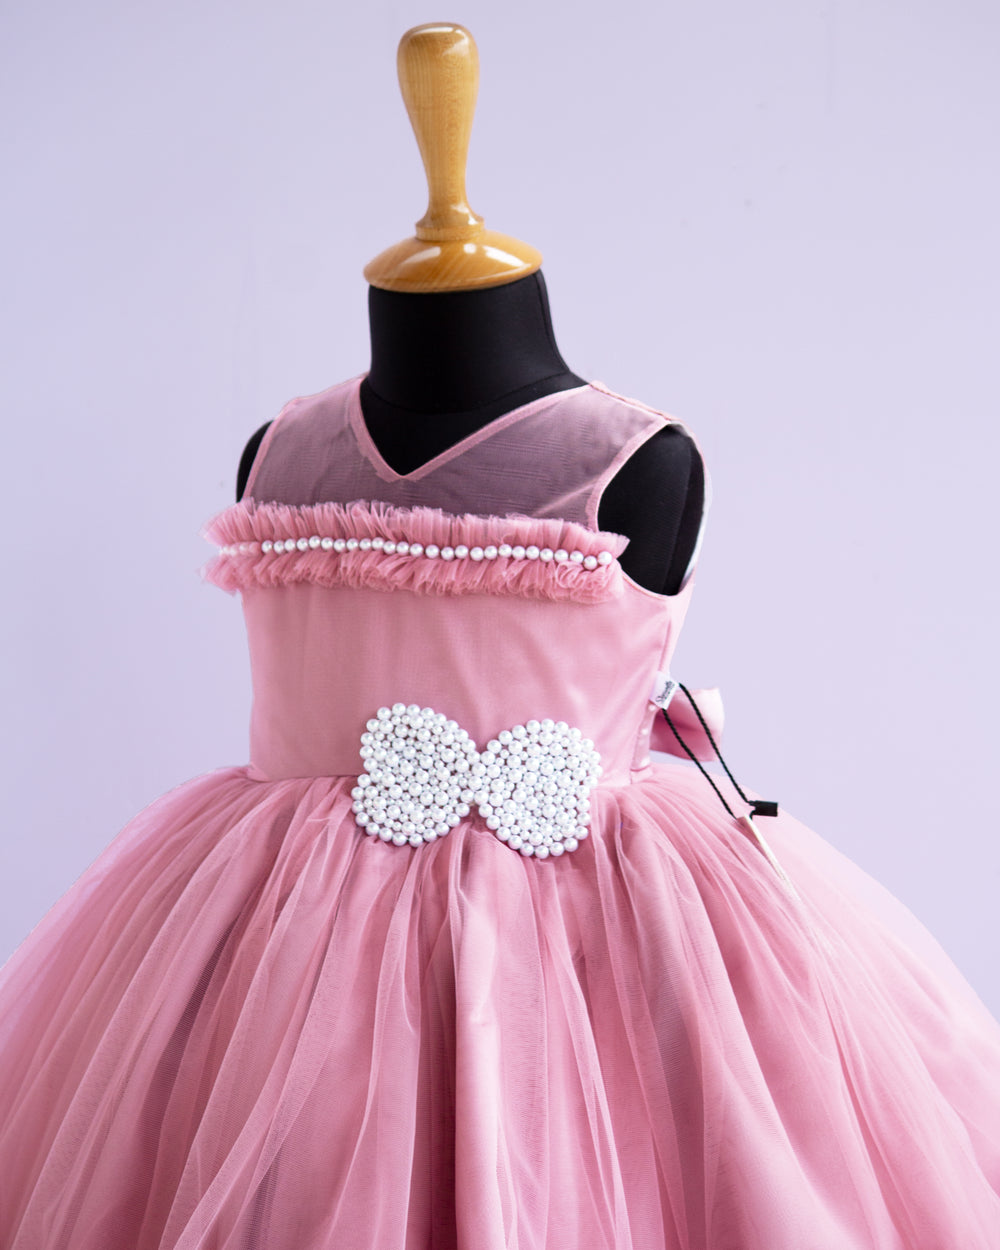 dust pink partywear frock kids baby girls stanwells kids, pearl applique frock, butterfly designs for kids, birthday dresses for baby girls, 1st birthday dresses, pastel pink frock